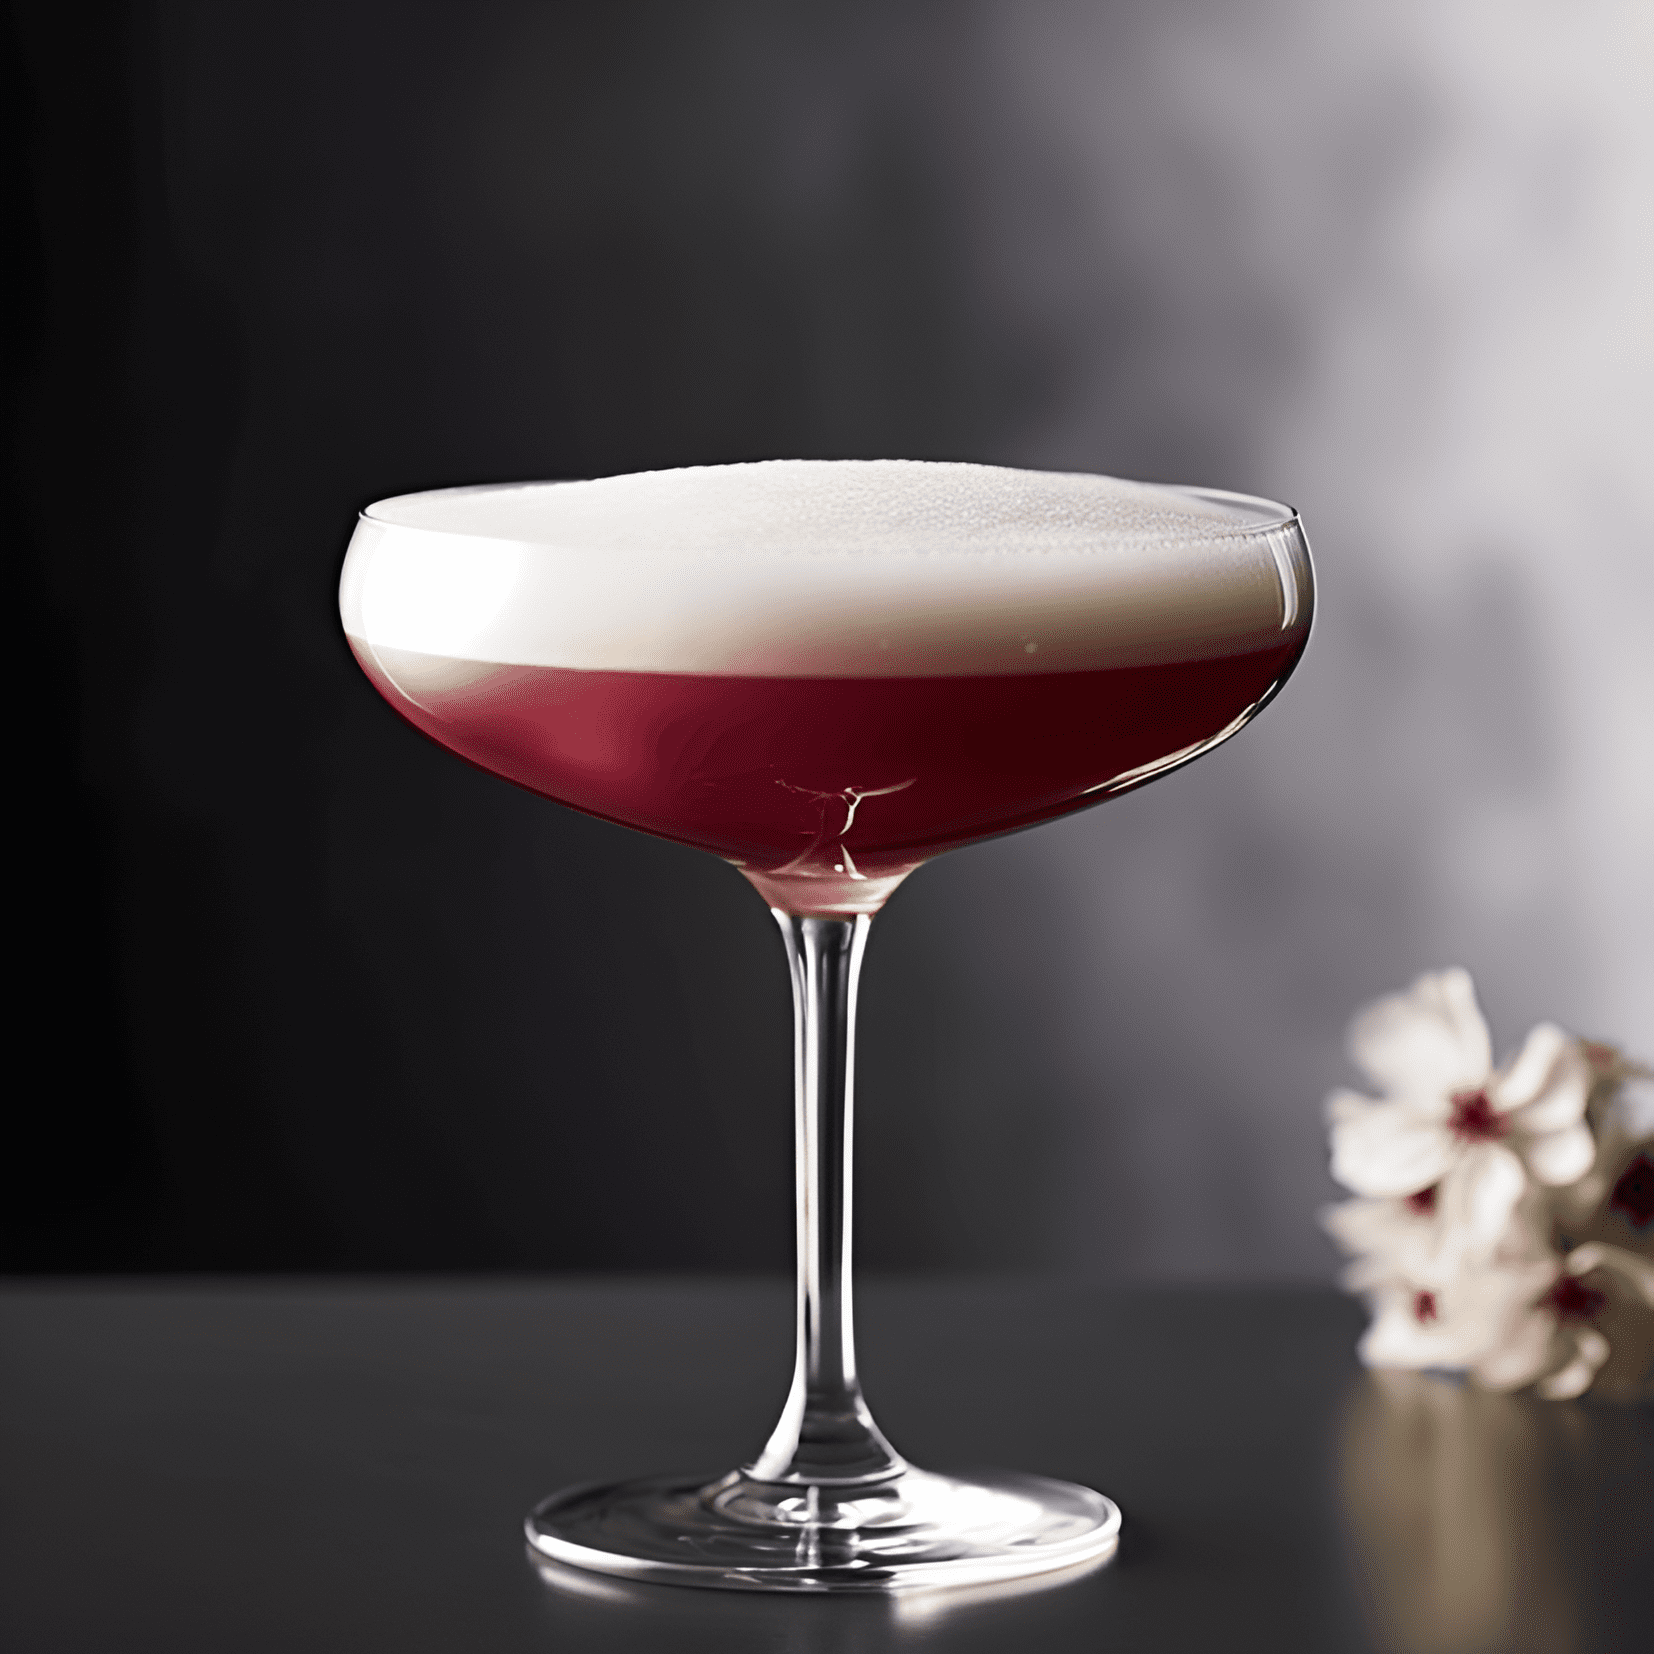 Port Flip Cocktail Recipe - The Port Flip has a rich, velvety texture with a perfect balance of sweetness and warmth. The port wine provides a fruity, complex base, while the egg and sugar create a smooth, creamy mouthfeel. The nutmeg adds a hint of spice, making this cocktail a delightful treat for the senses.